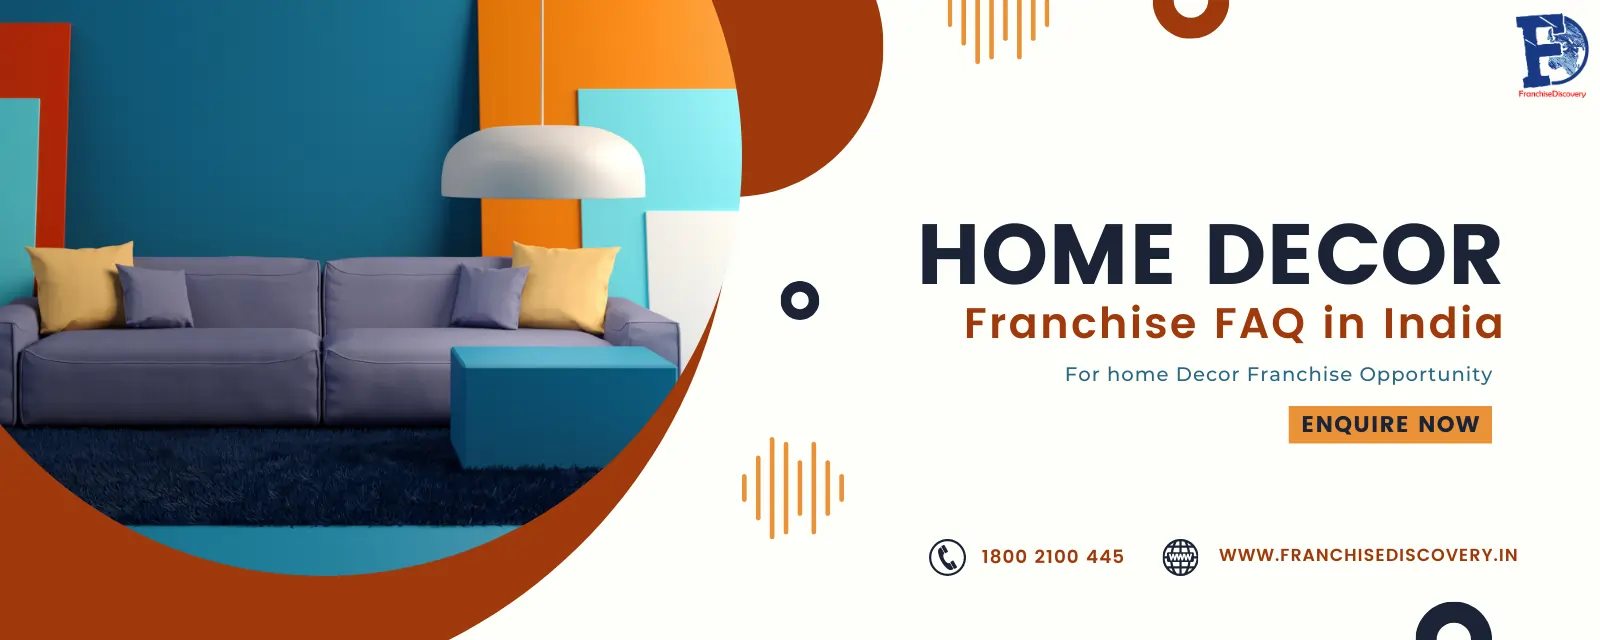 Home Decor Franchise FAQ in India - Franchise Discovery